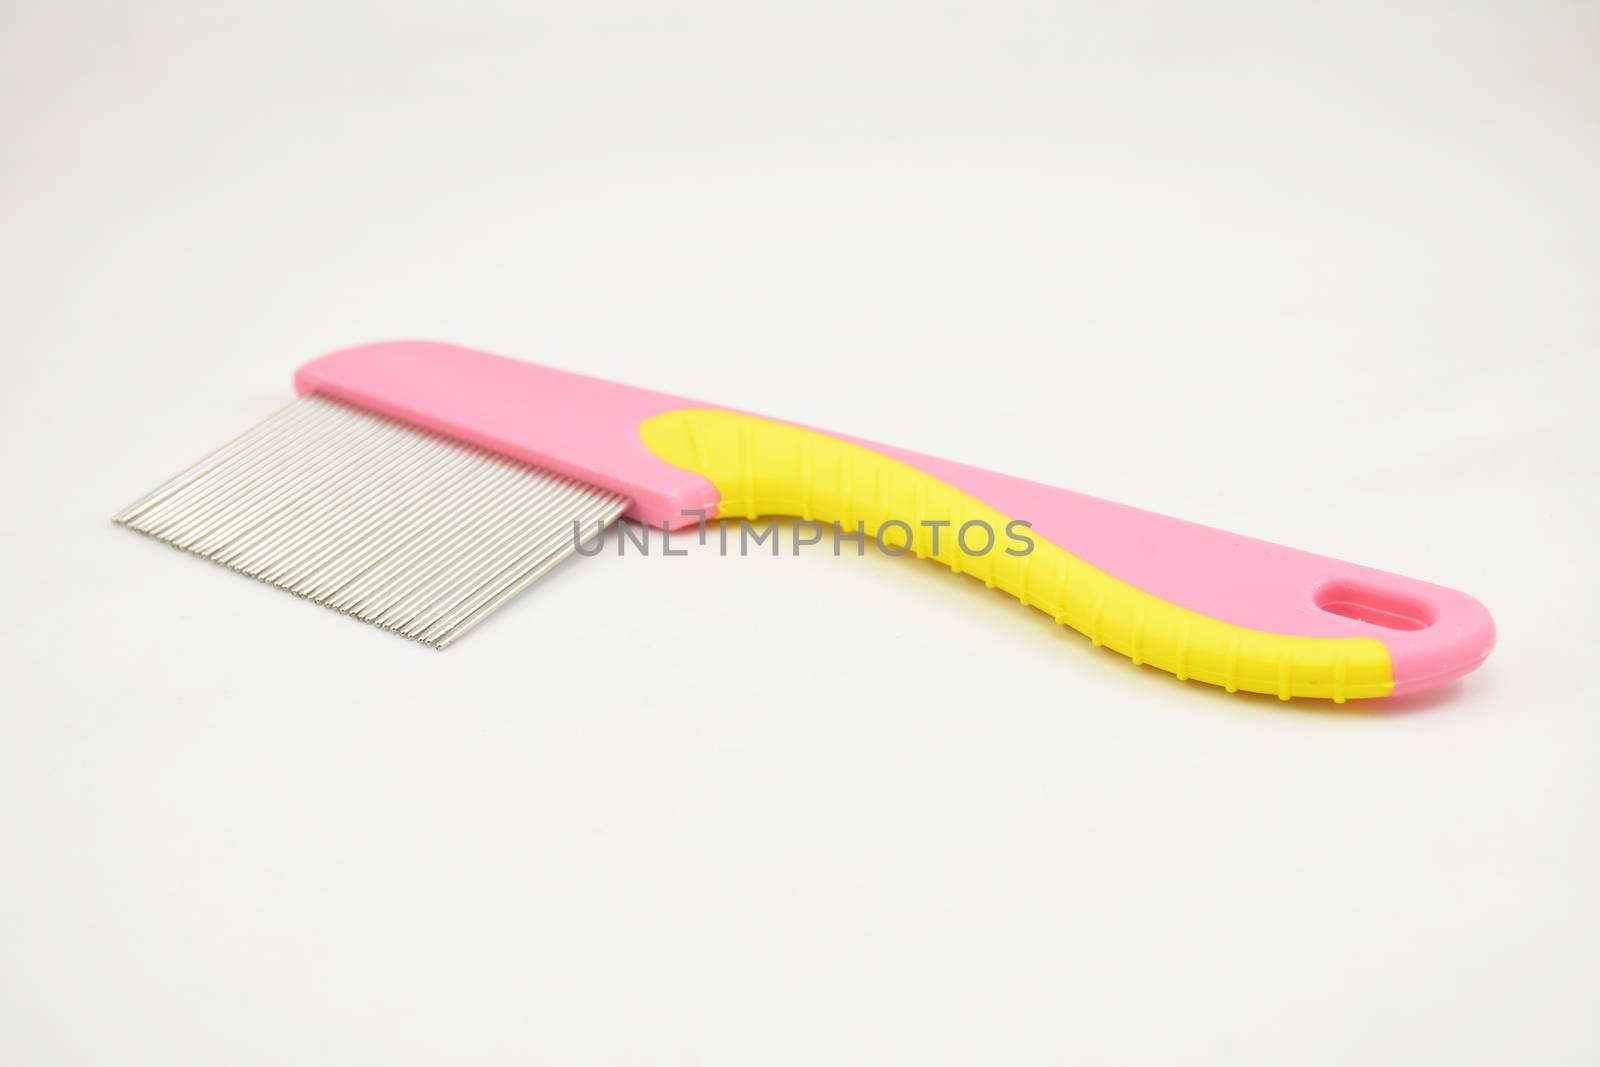 Lice comb stainless steel tooth pink and yellow handle by imwaltersy